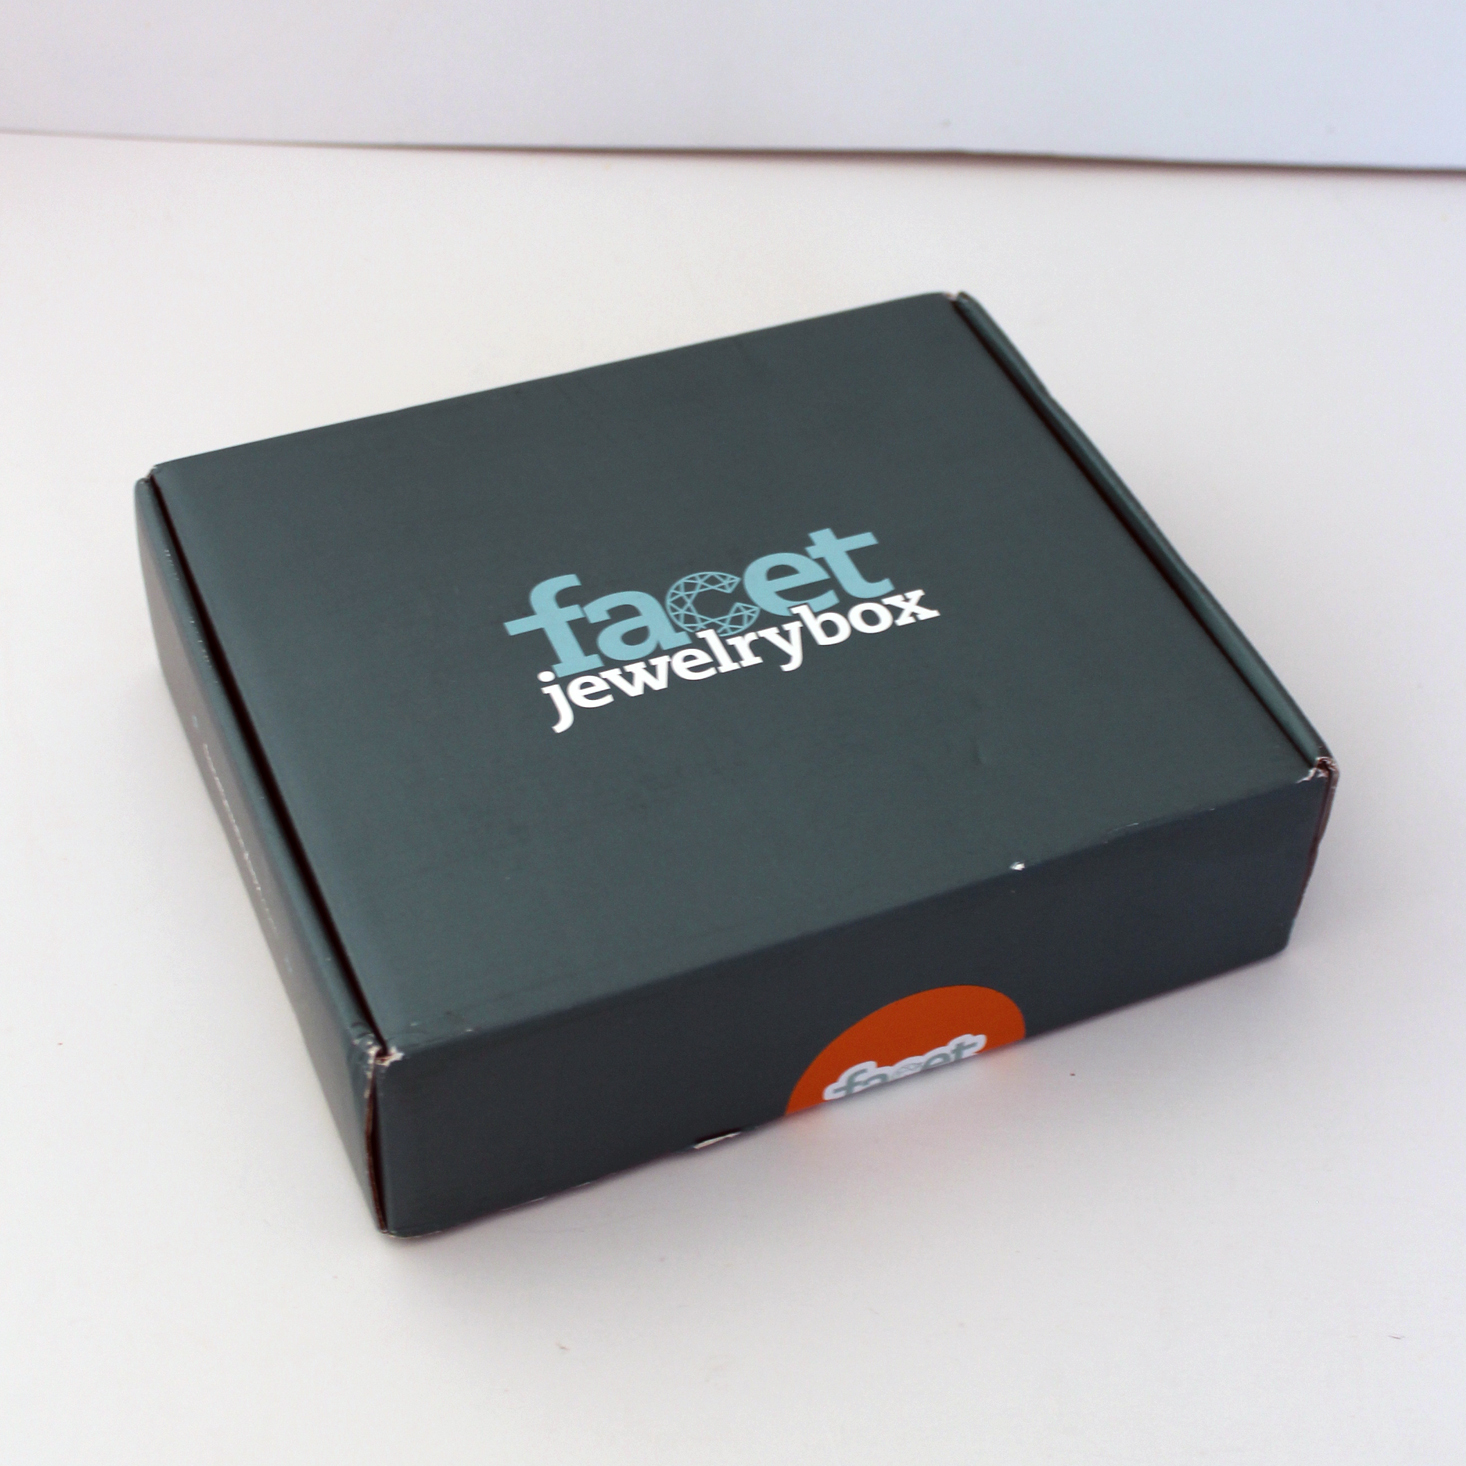 Facet Jewelry Box Bead Stitching Review + Coupon –  March 2019